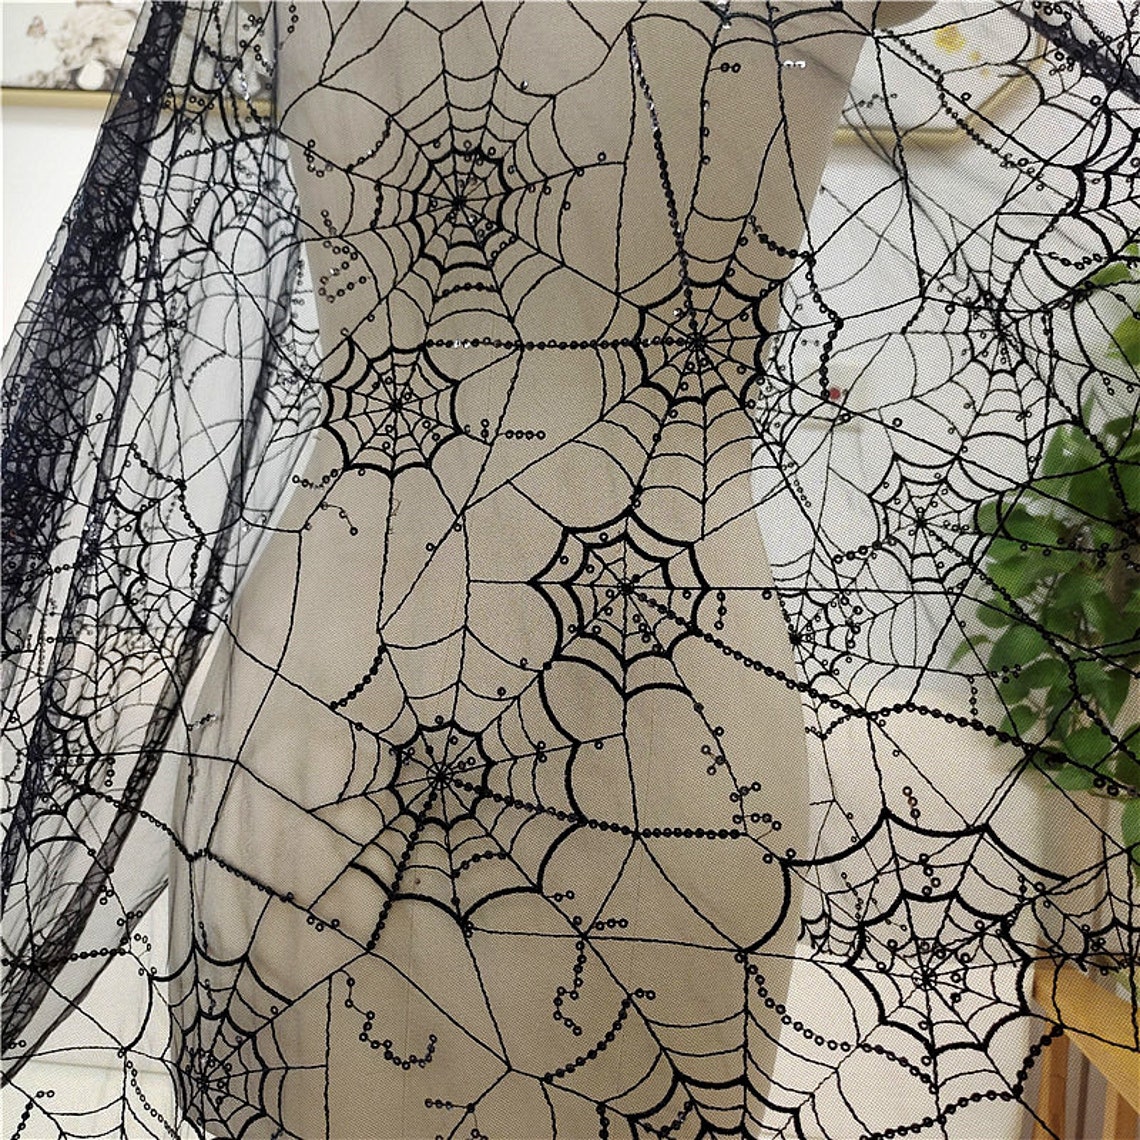 1 Yard Black Tulle Sequin Spider Web Embroidery Lace Fabric - Etsy